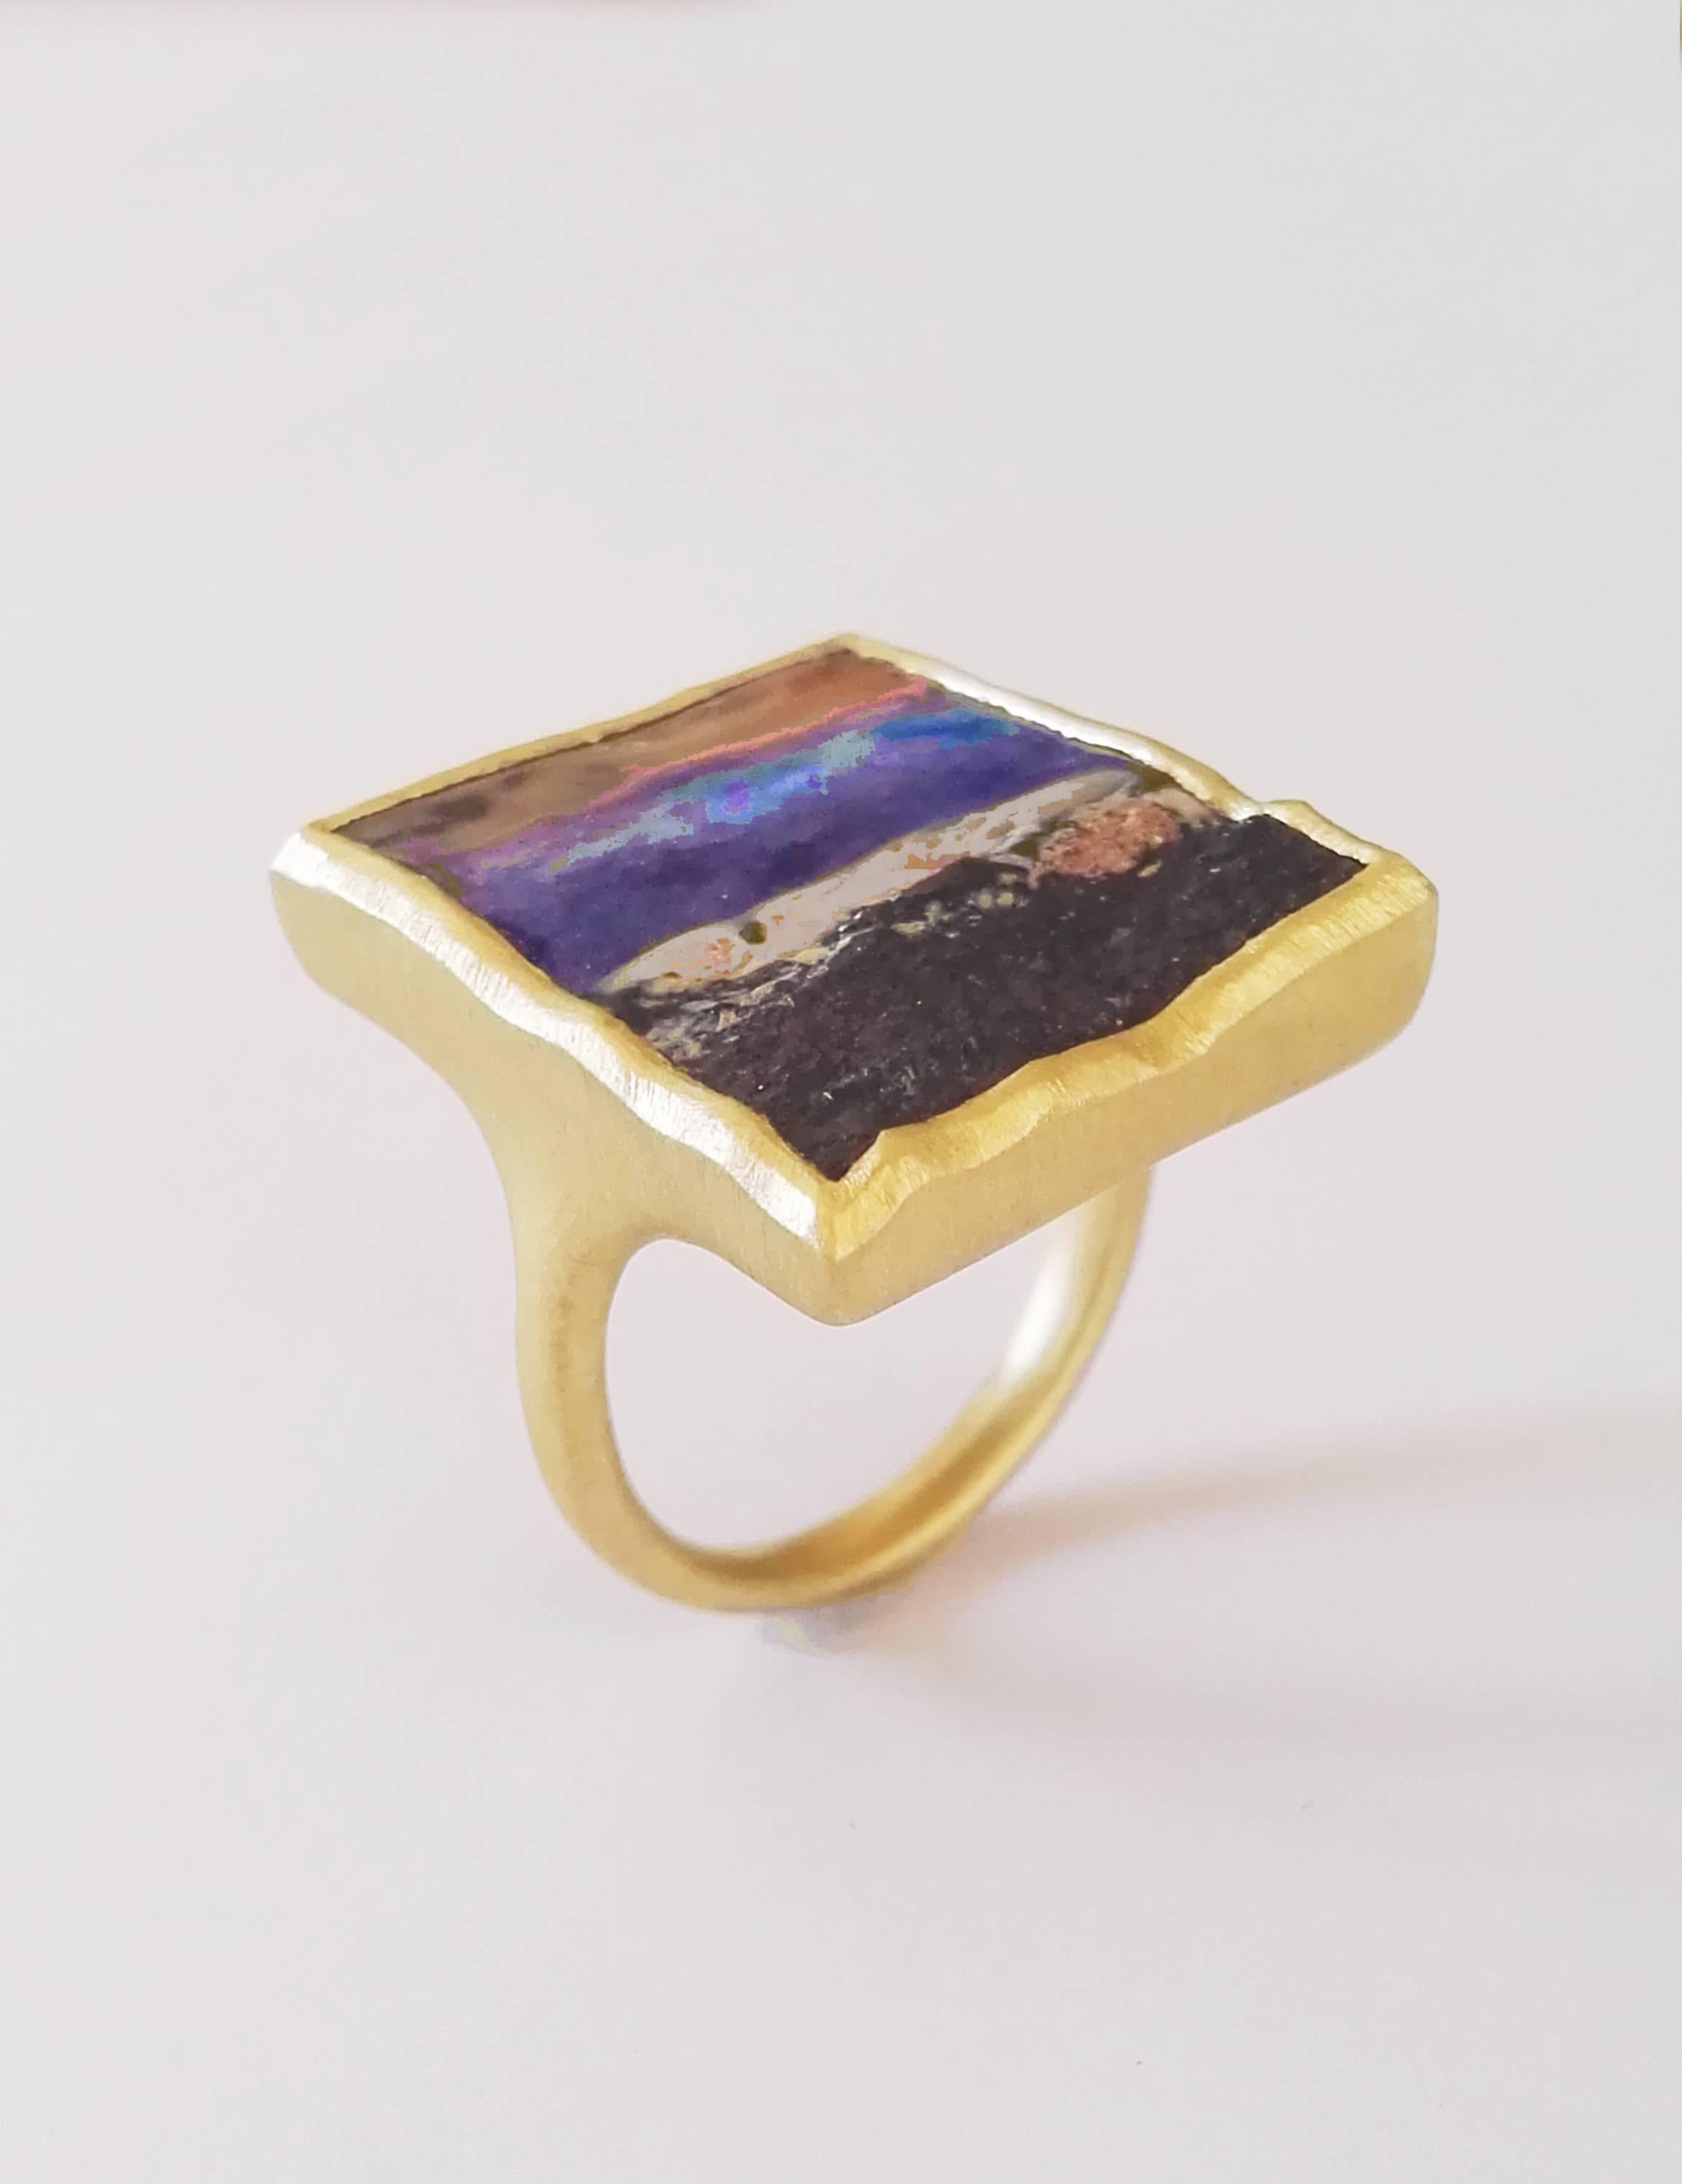 Dalben design One of a kind 18k yellow gold satin finishing ring with a 17.44 carat bezel-set Boulder Opal.
This magnificent bouder opal look like a Turner painting !
Ring size 7  1/4  - EU 55 re-sizable to most finger sizes.
The Ring has been